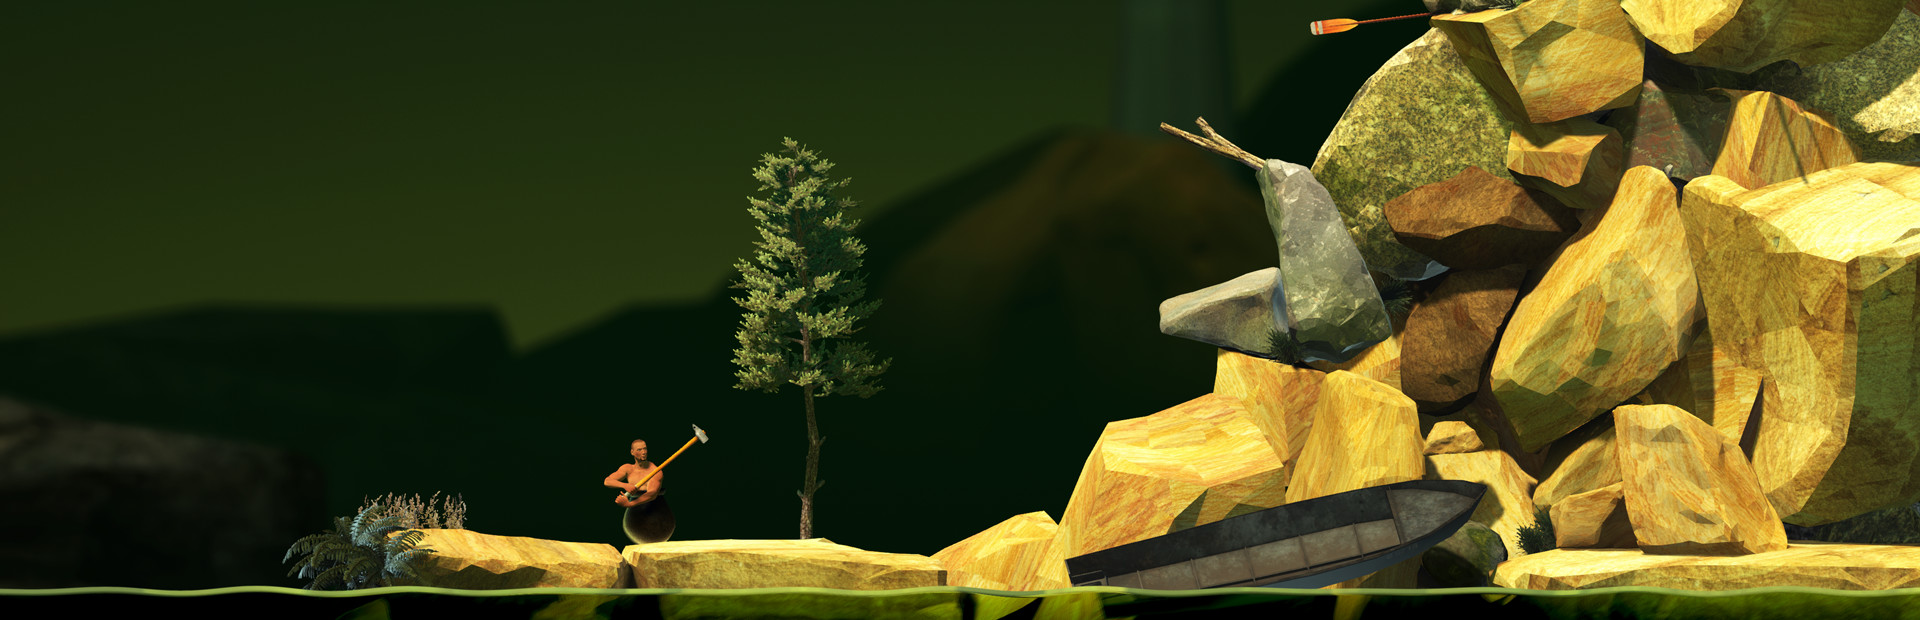 Getting Over It with Bennett Foddy cover image